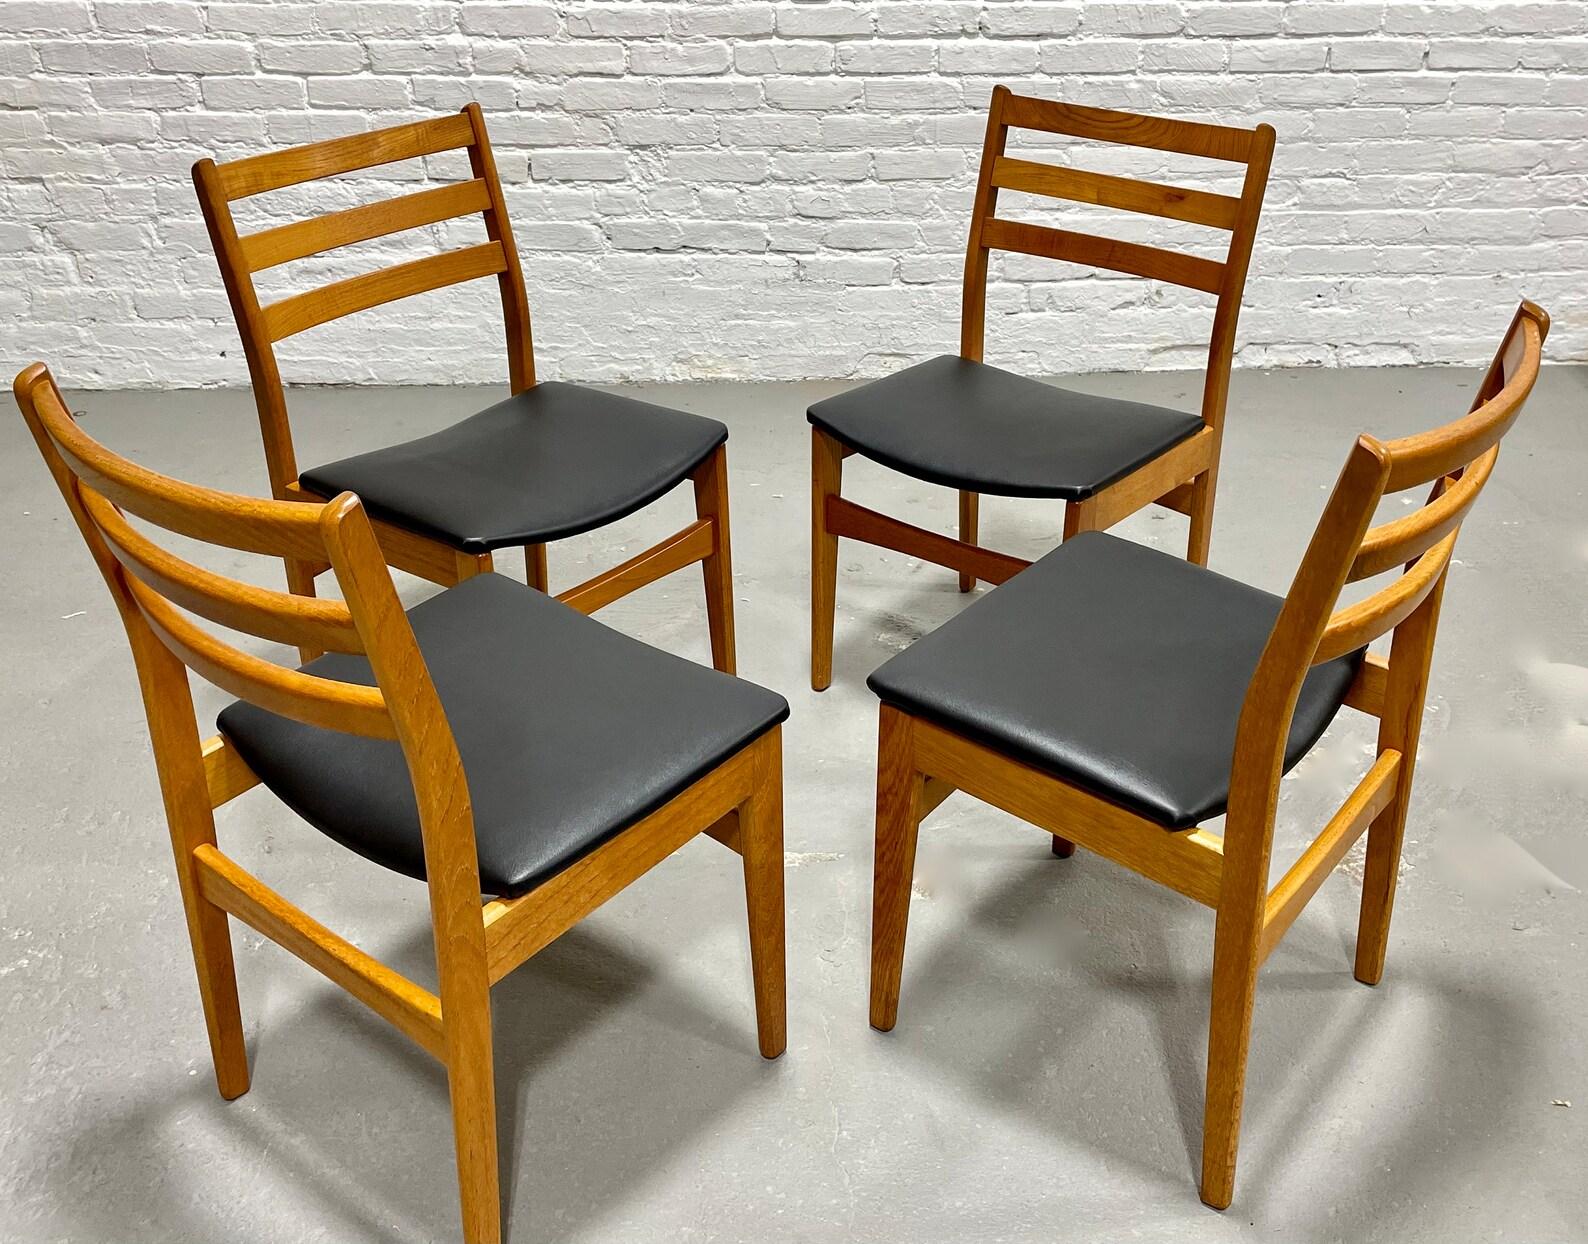 Mid-20th Century Mid-Century Modern Teak Dining Chairs by Nordic Furniture, Set of 4 For Sale